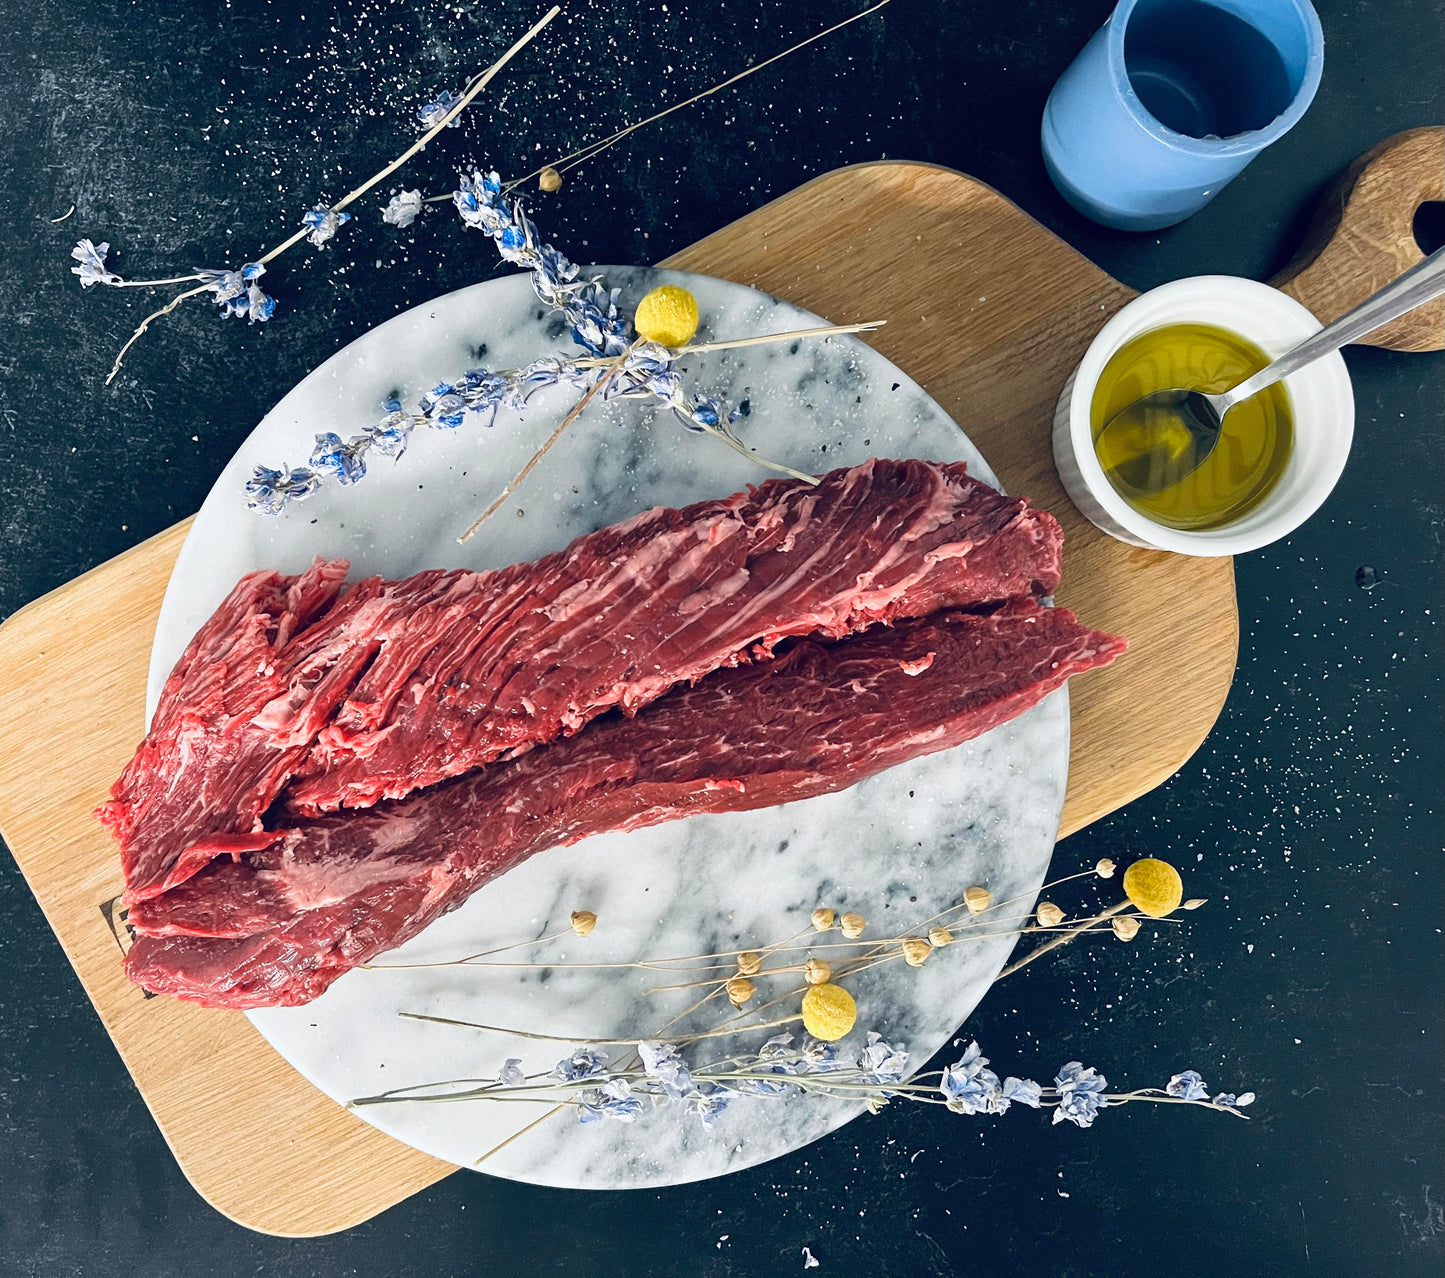 Hanger Steak - Onglet (Available in Different Marinades)